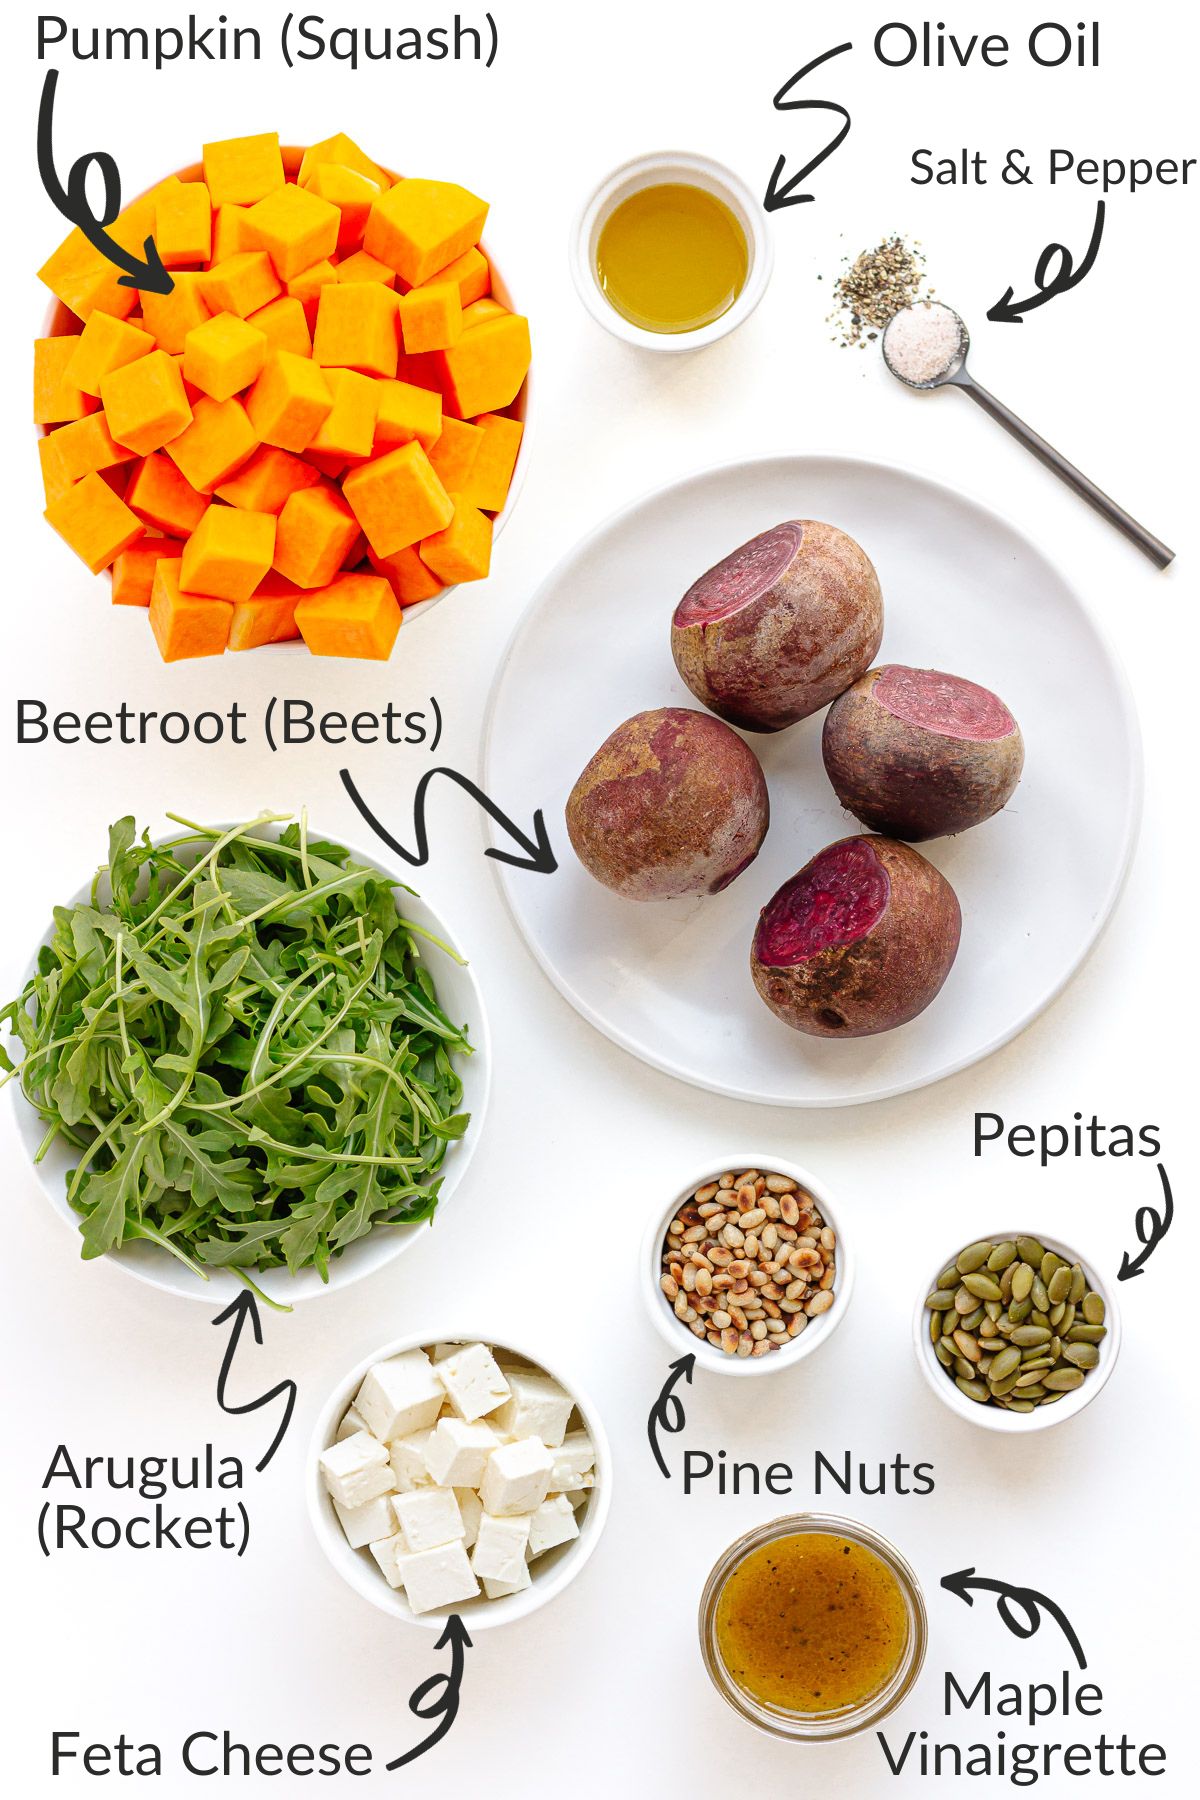 Labelled photo of ingredients needed to make roasted pumpkin and beetroot salad.